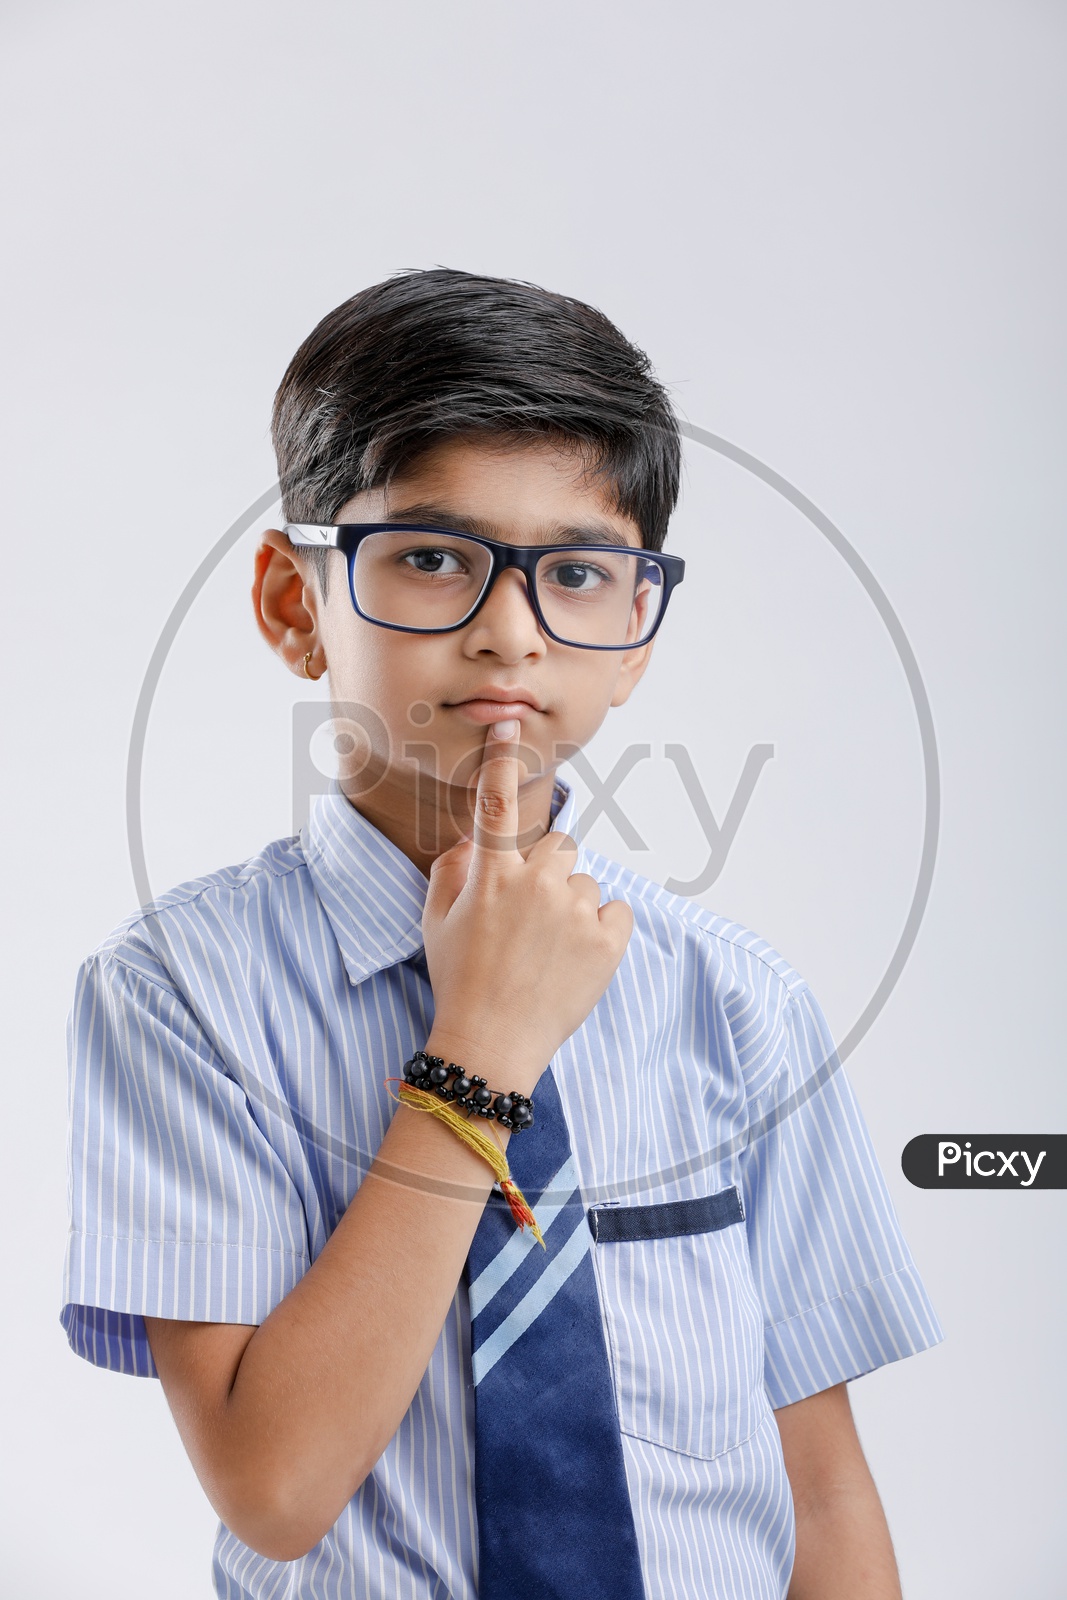 Indian Or Asian Boy Or Kid Or student in School Uniform  Wearing Spectacles And  Posing  Over an Isolated White Background